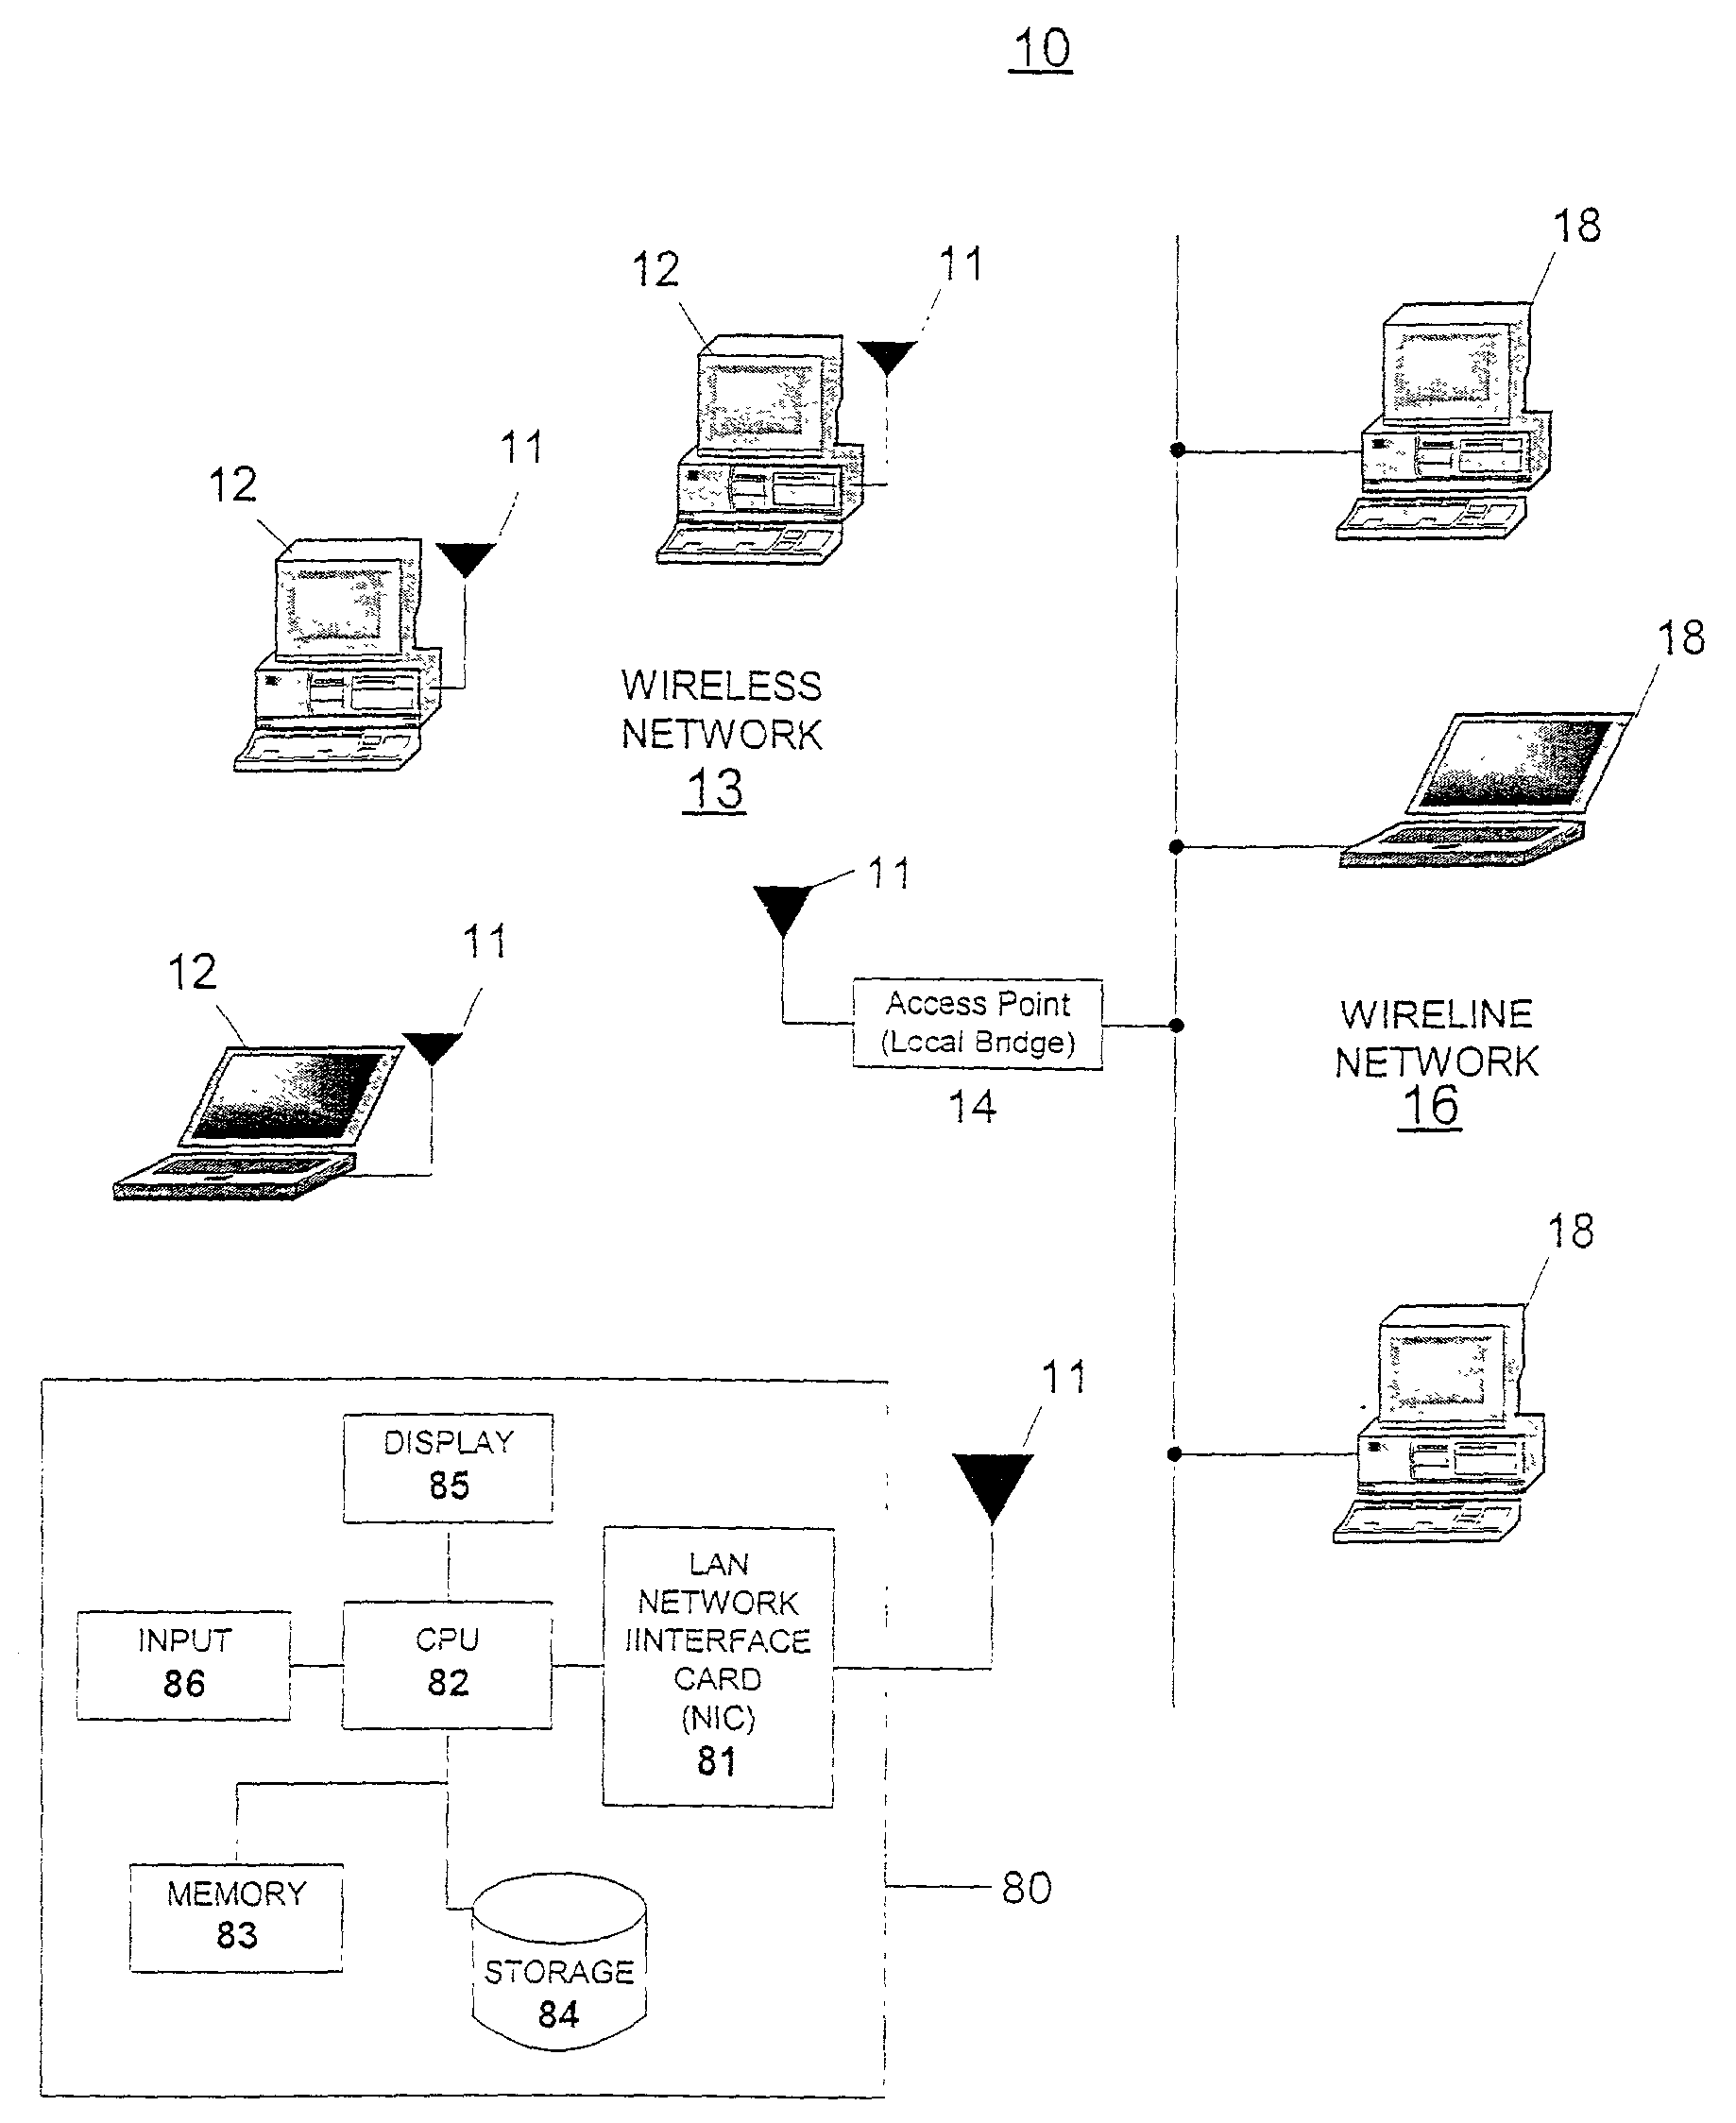 Method and apparatus for detailed protocol analysis of frames captured in an IEEE 802.11 (b) wireless LAN